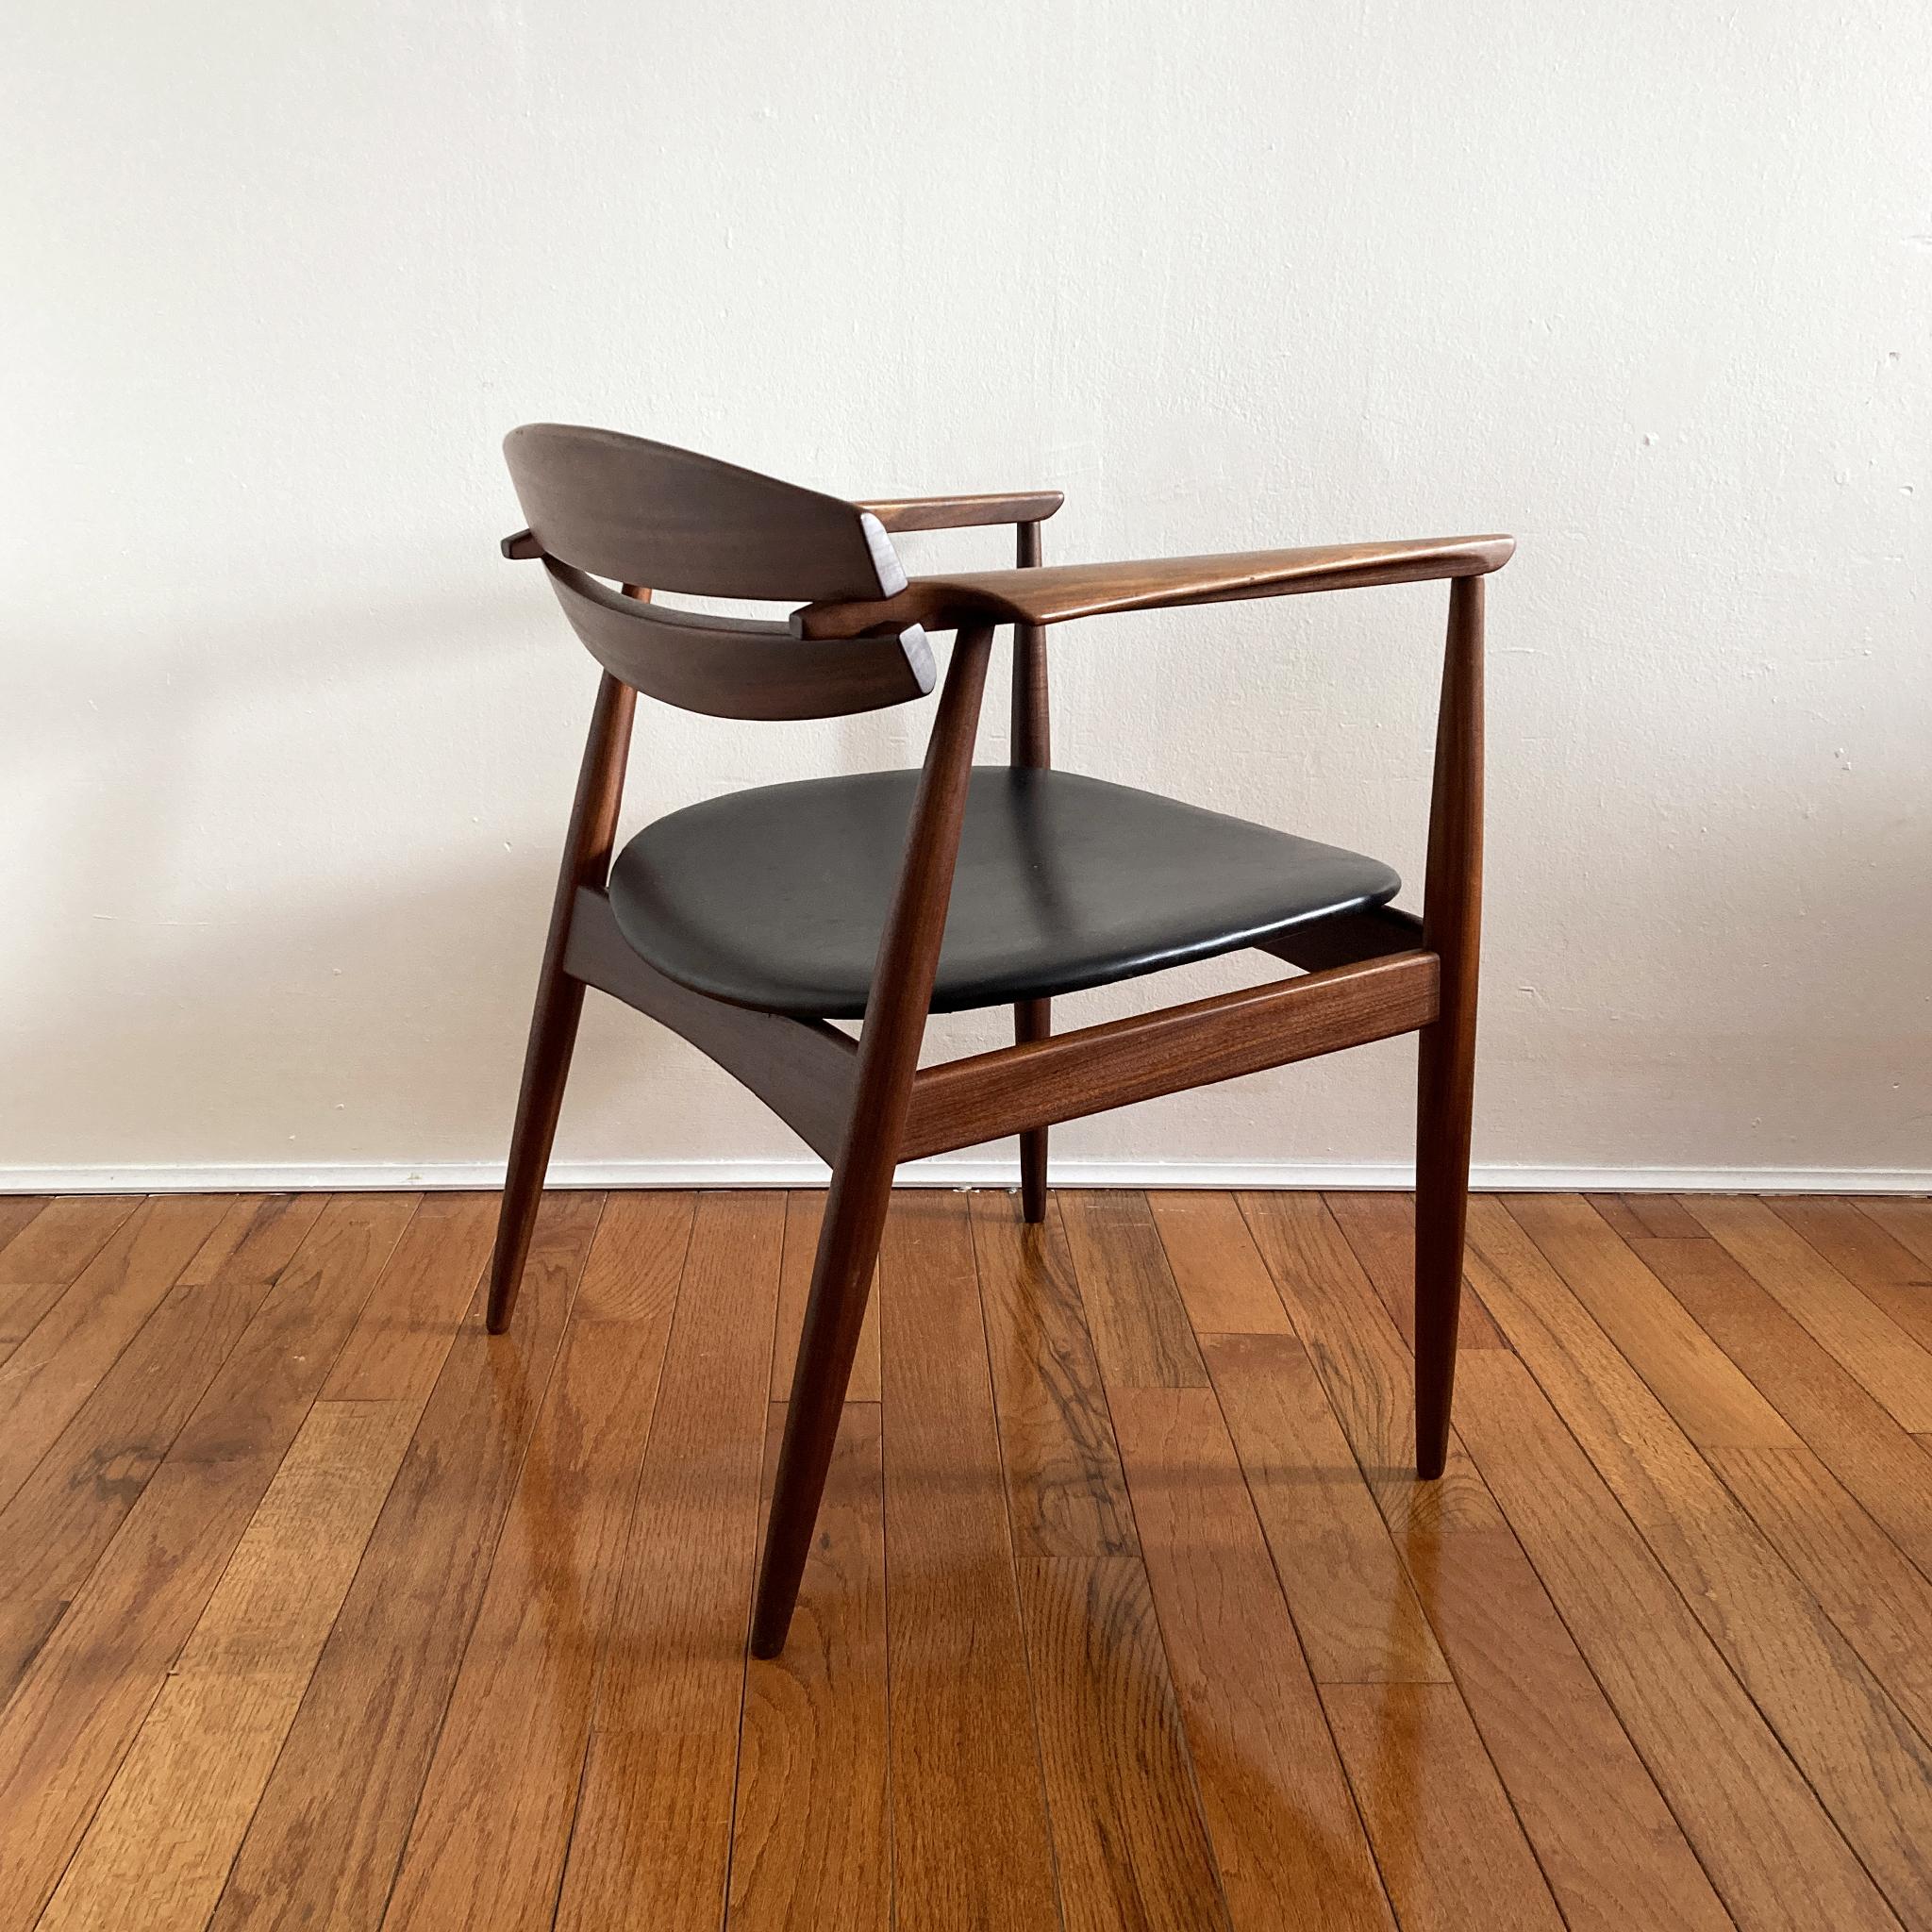 Danish Sylvester & Matz Teak Chair with Black Faux Leather Seat, 1950s For Sale